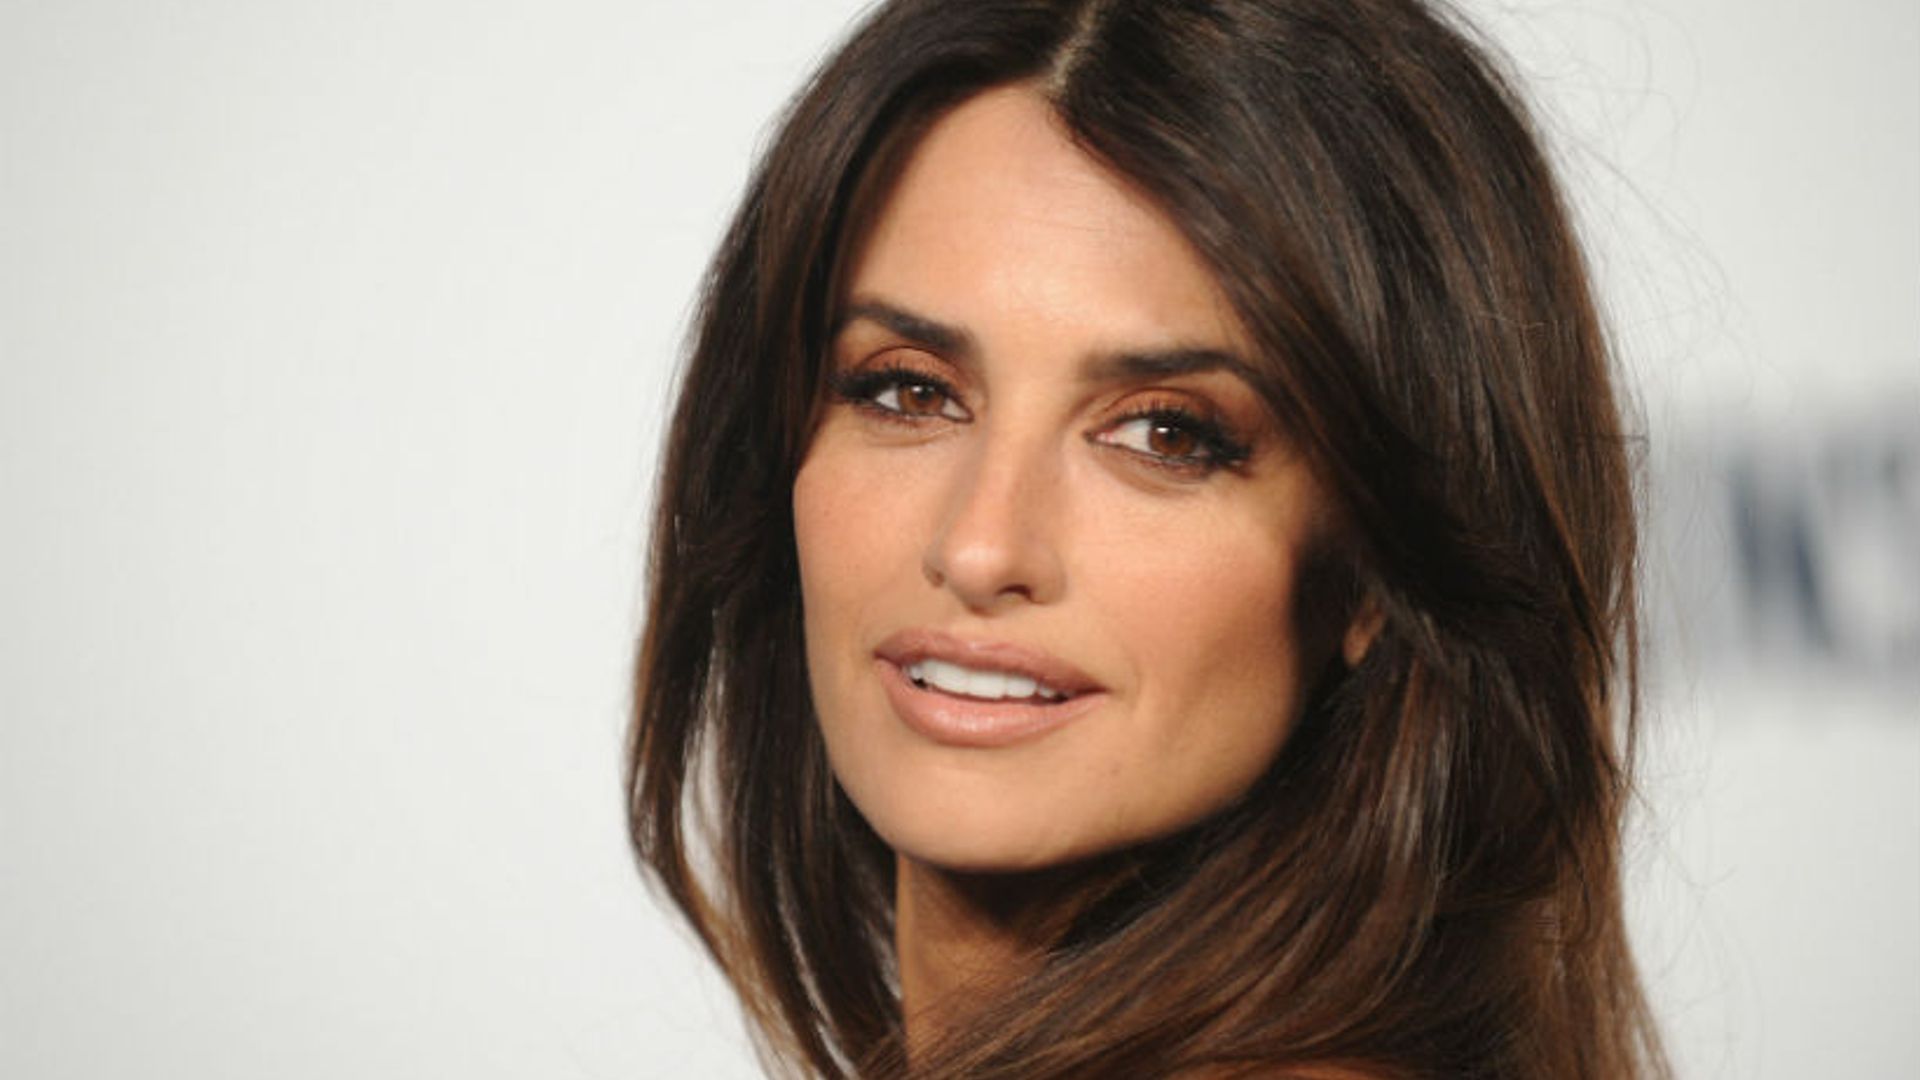 Penelope Cruz looks dramatically different as a blonde for Donatella Versace role – take a look